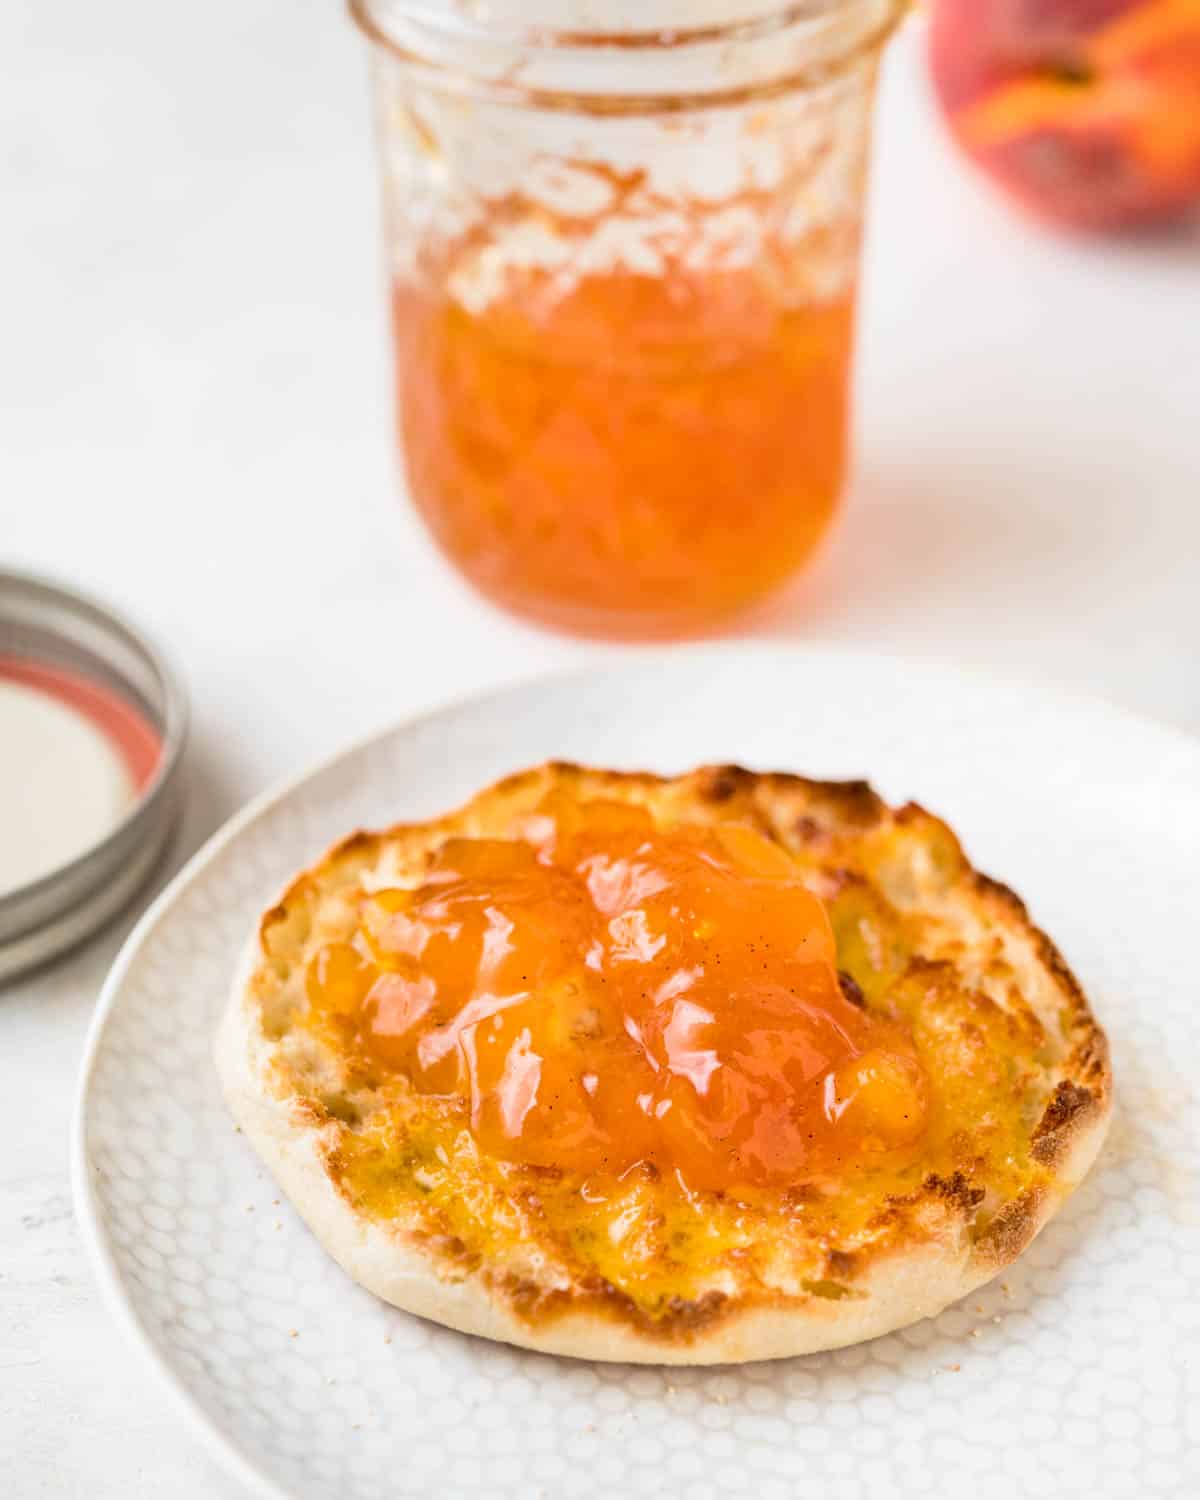 An english muffin topped with peach jam.